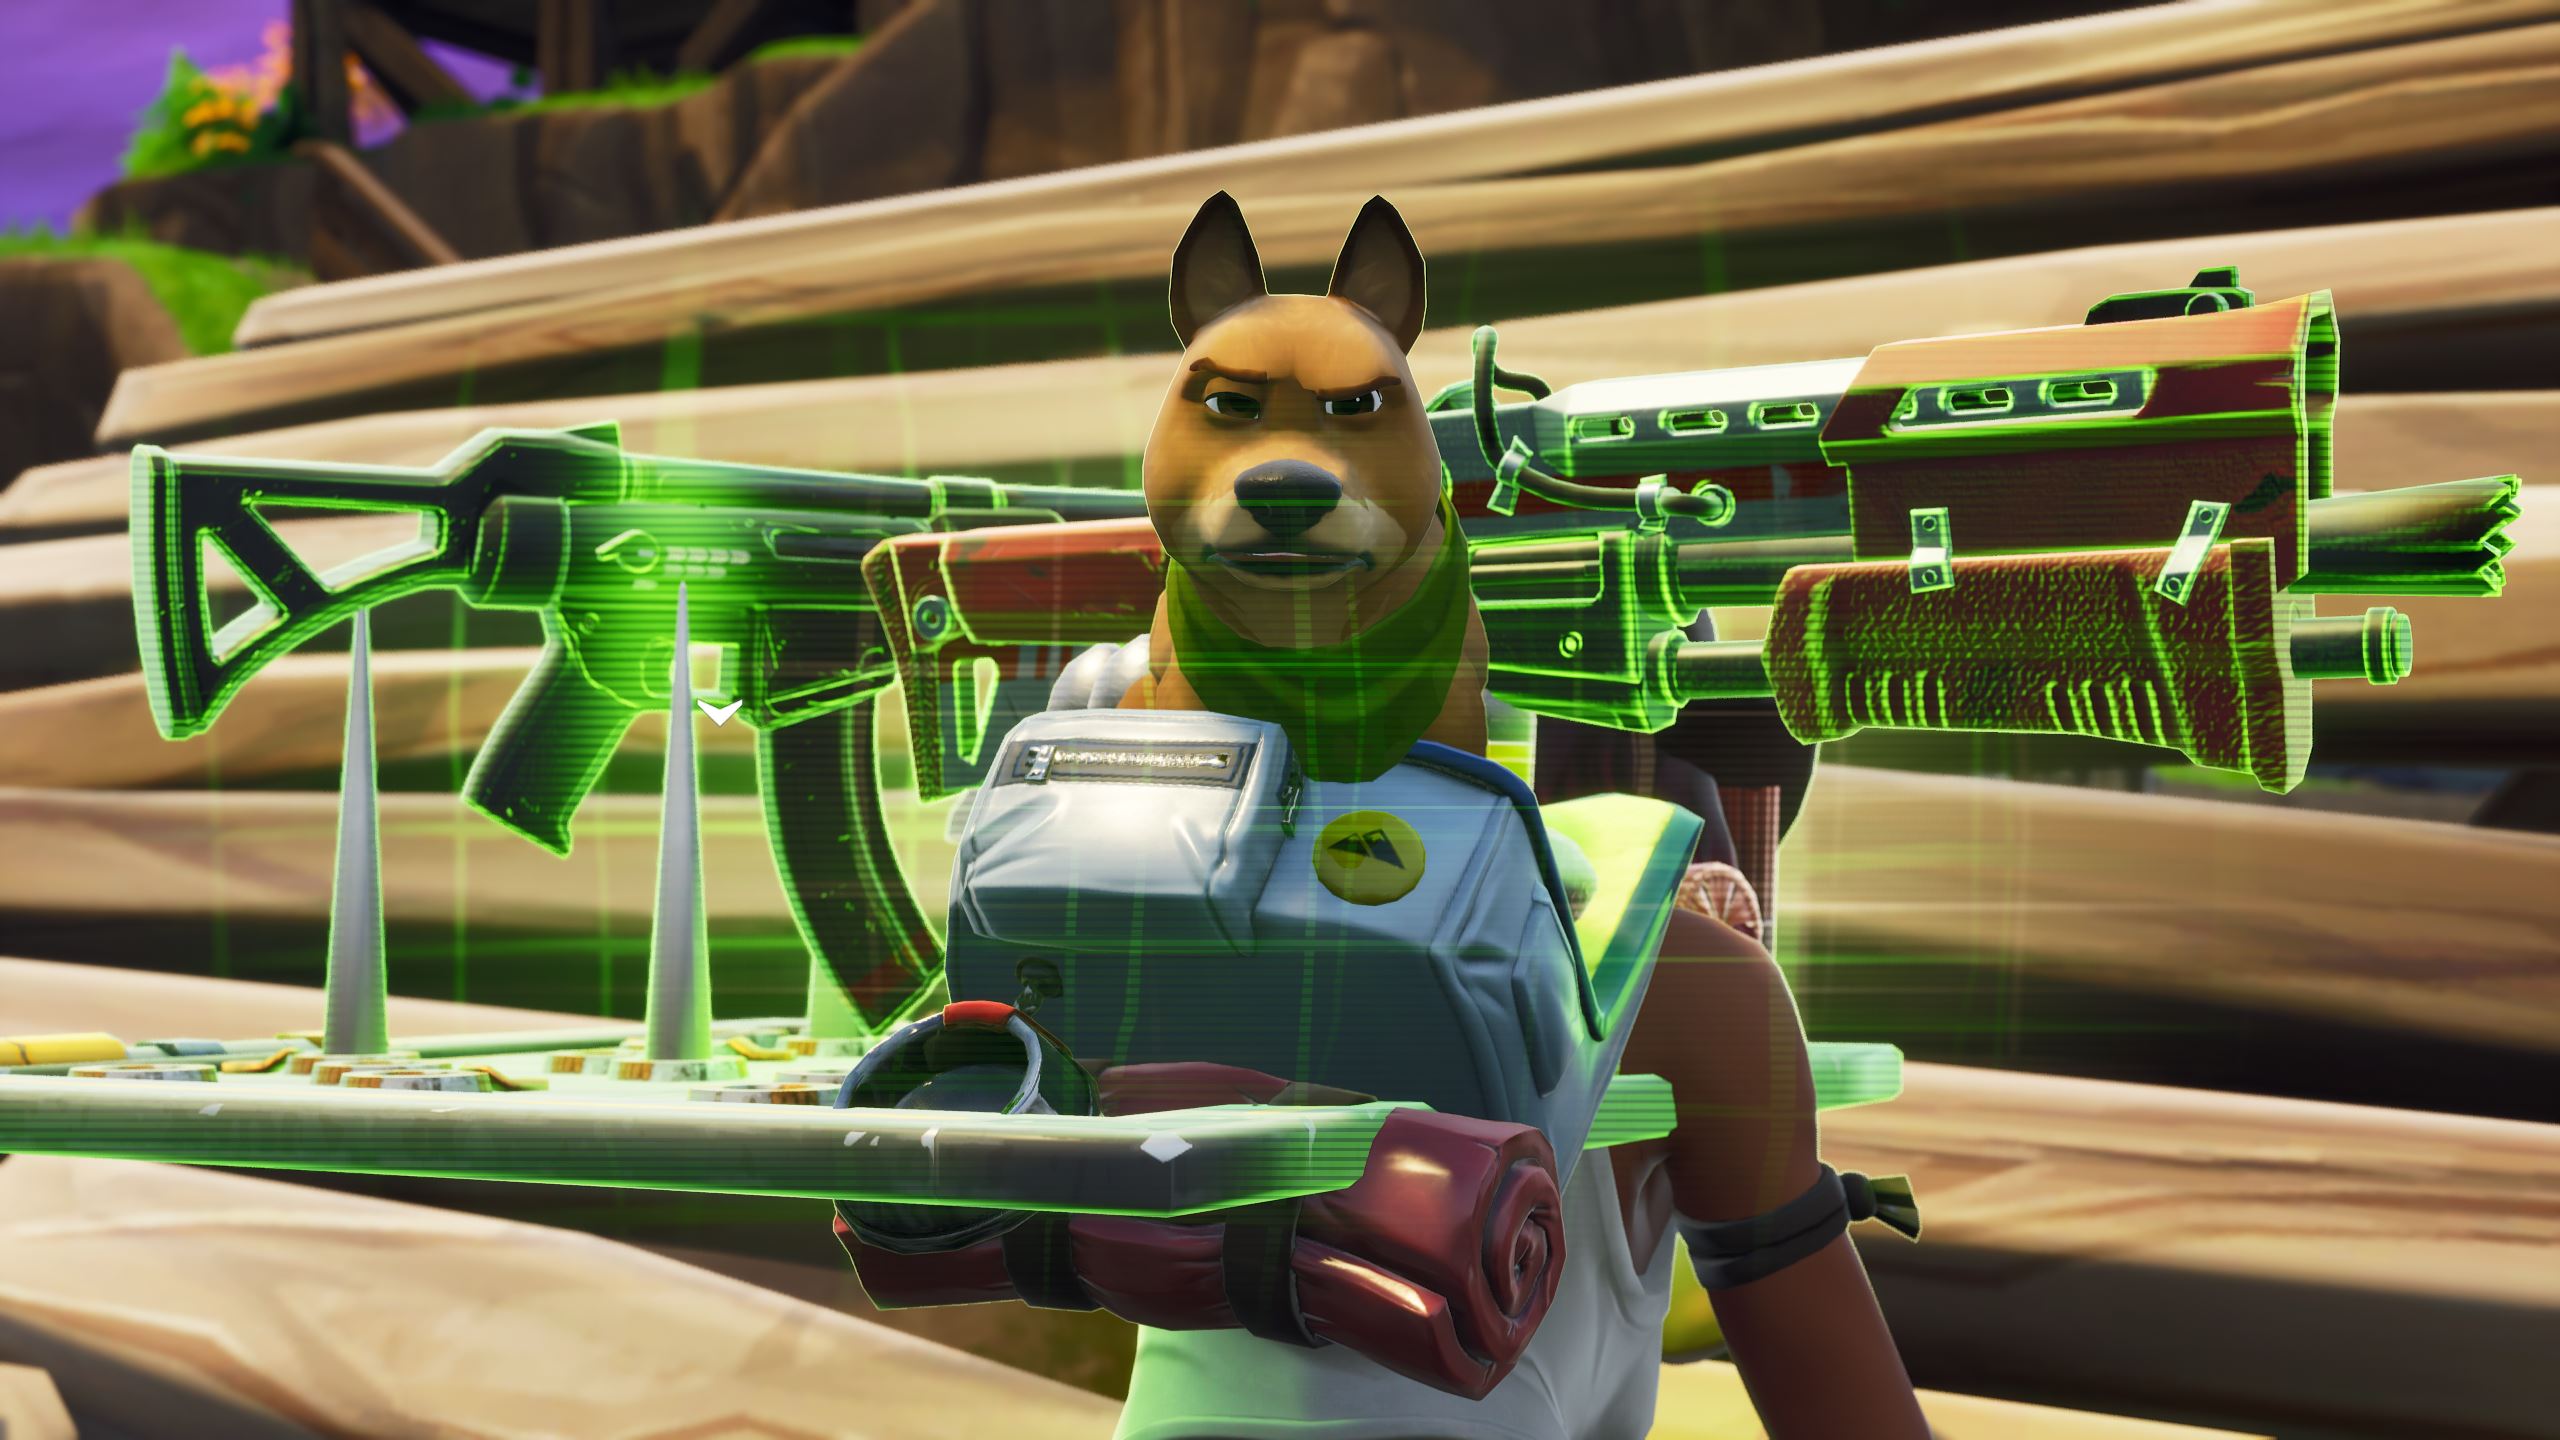 scammers are targeting fortnite cheaters with data stealing malware - fortnite cheaters